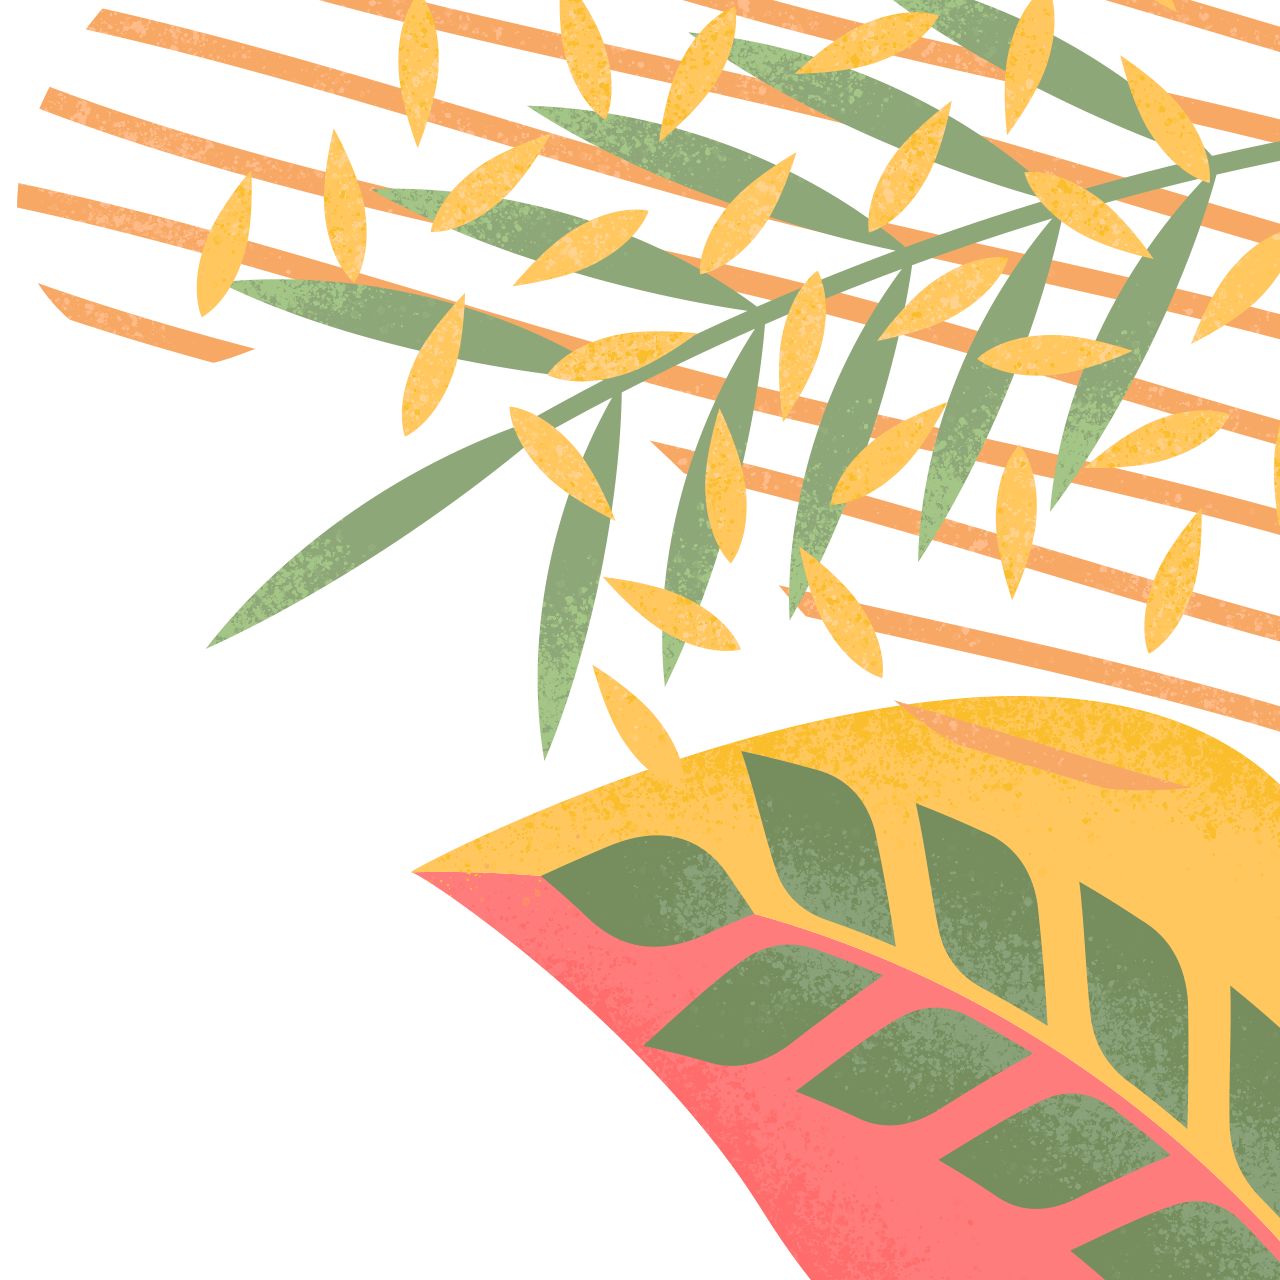 Another illustration of plants and leaves